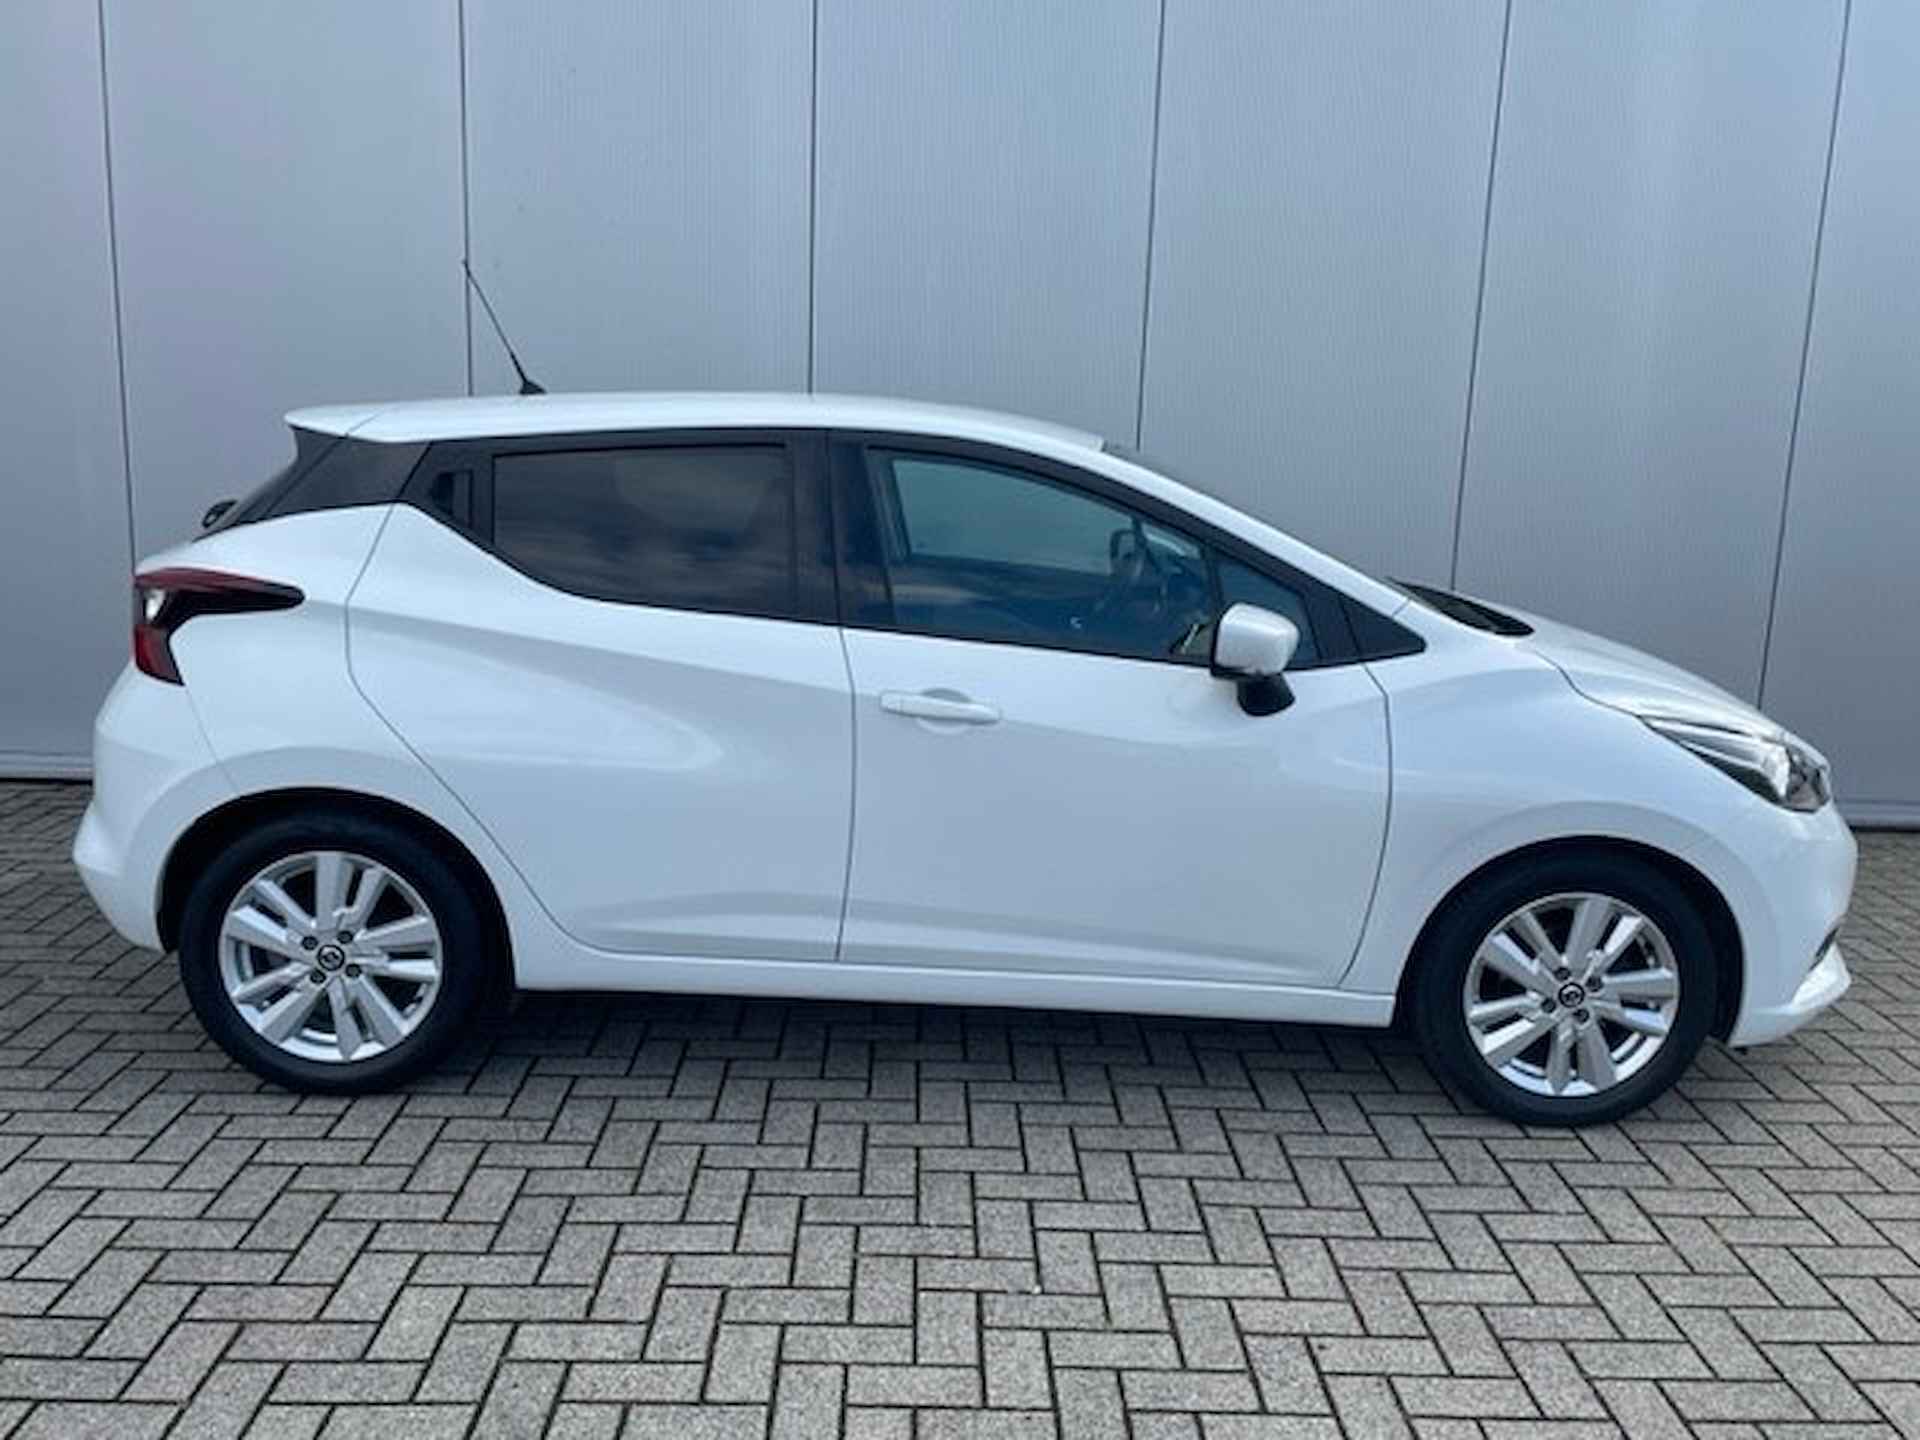 Nissan Micra 1.0 IG-T N-Connecta Automaat Navigatie, Airco, Cruise Control, 16"Lm, Achteruitrijcamera - 3/23